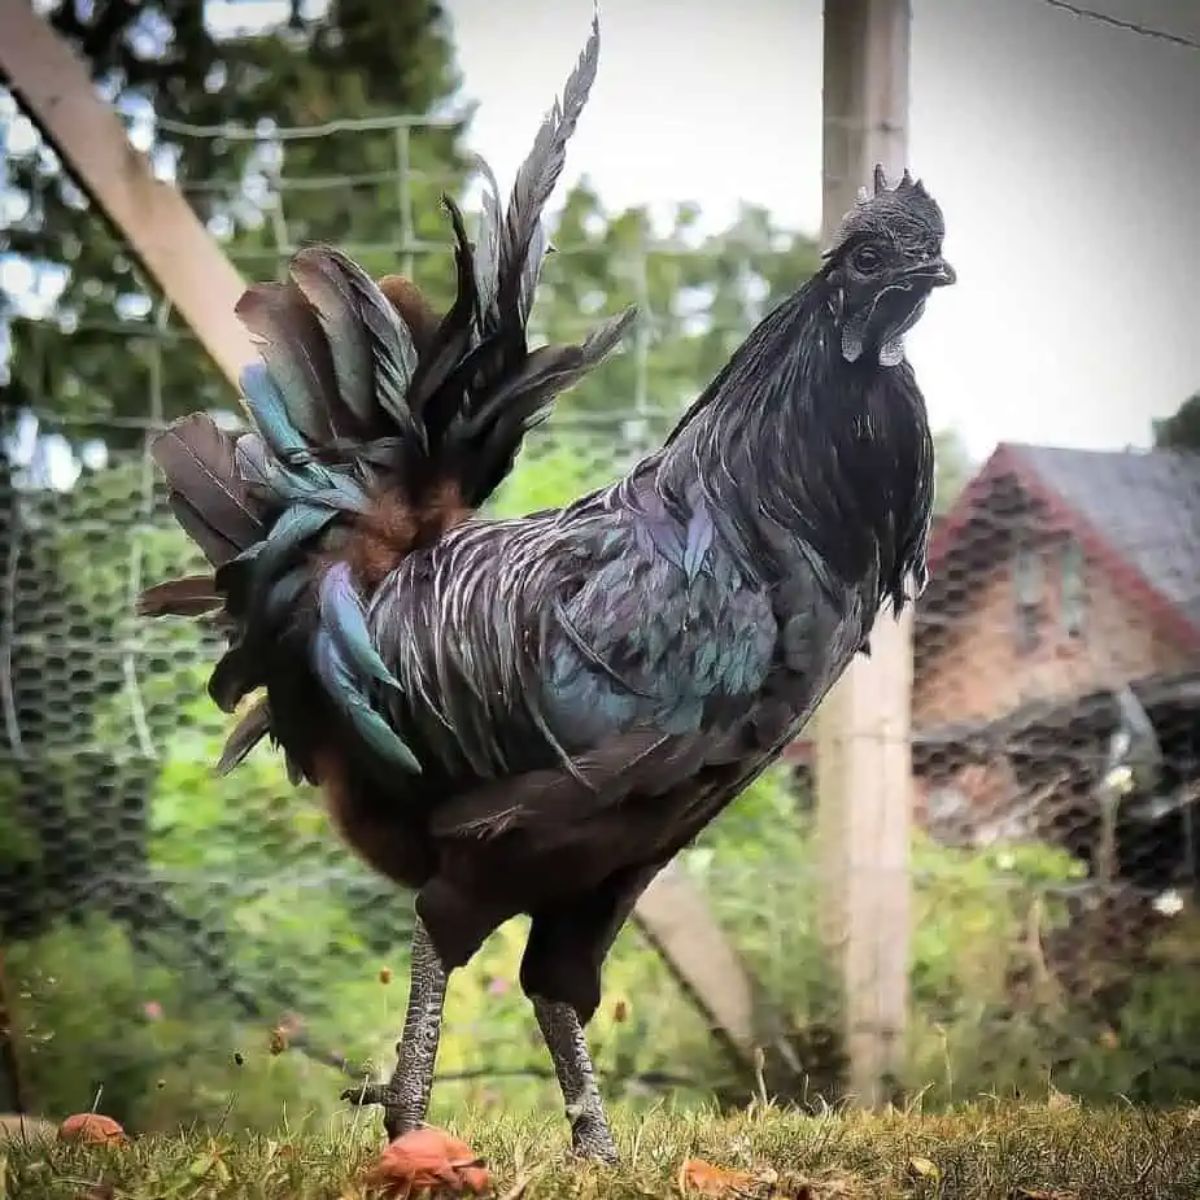 A beauitful Swedish Black rooster near a fence.